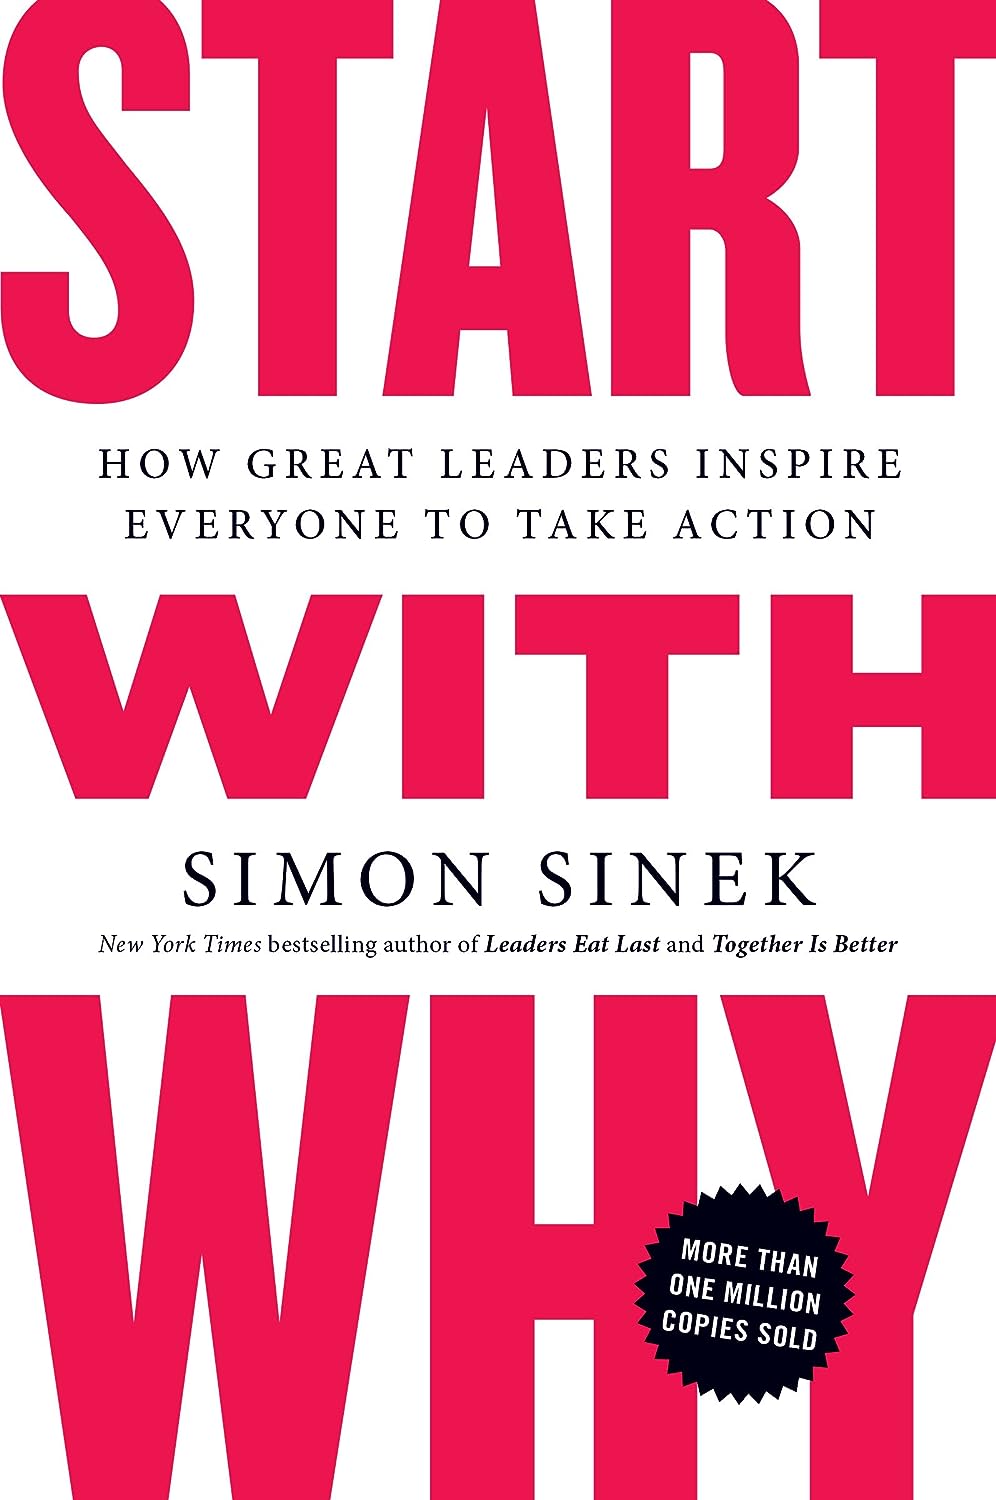 books about servant leadership12